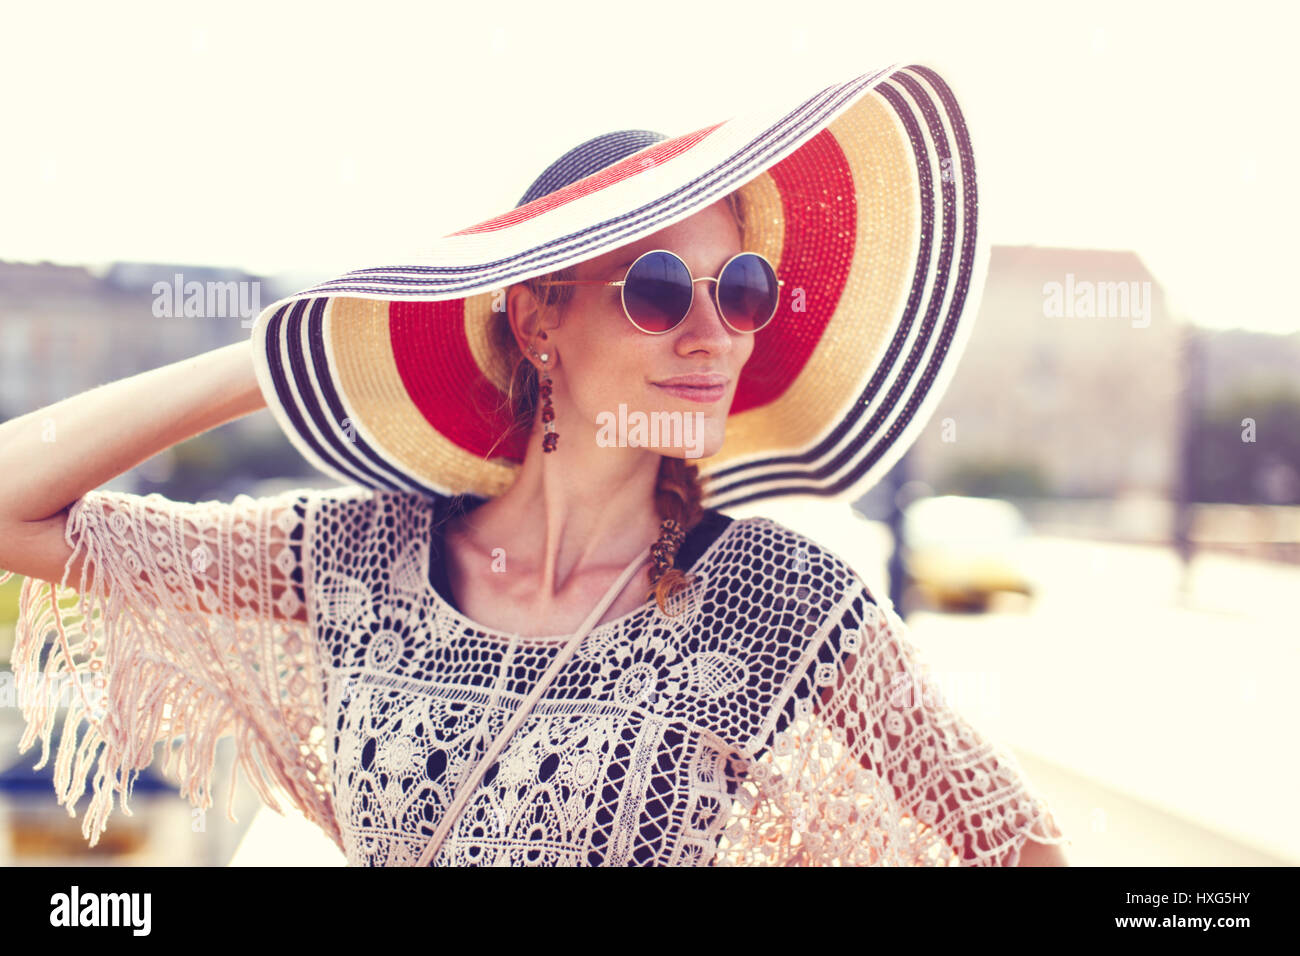 Happy young woman holding touristique hat outdoor, looking away Banque D'Images